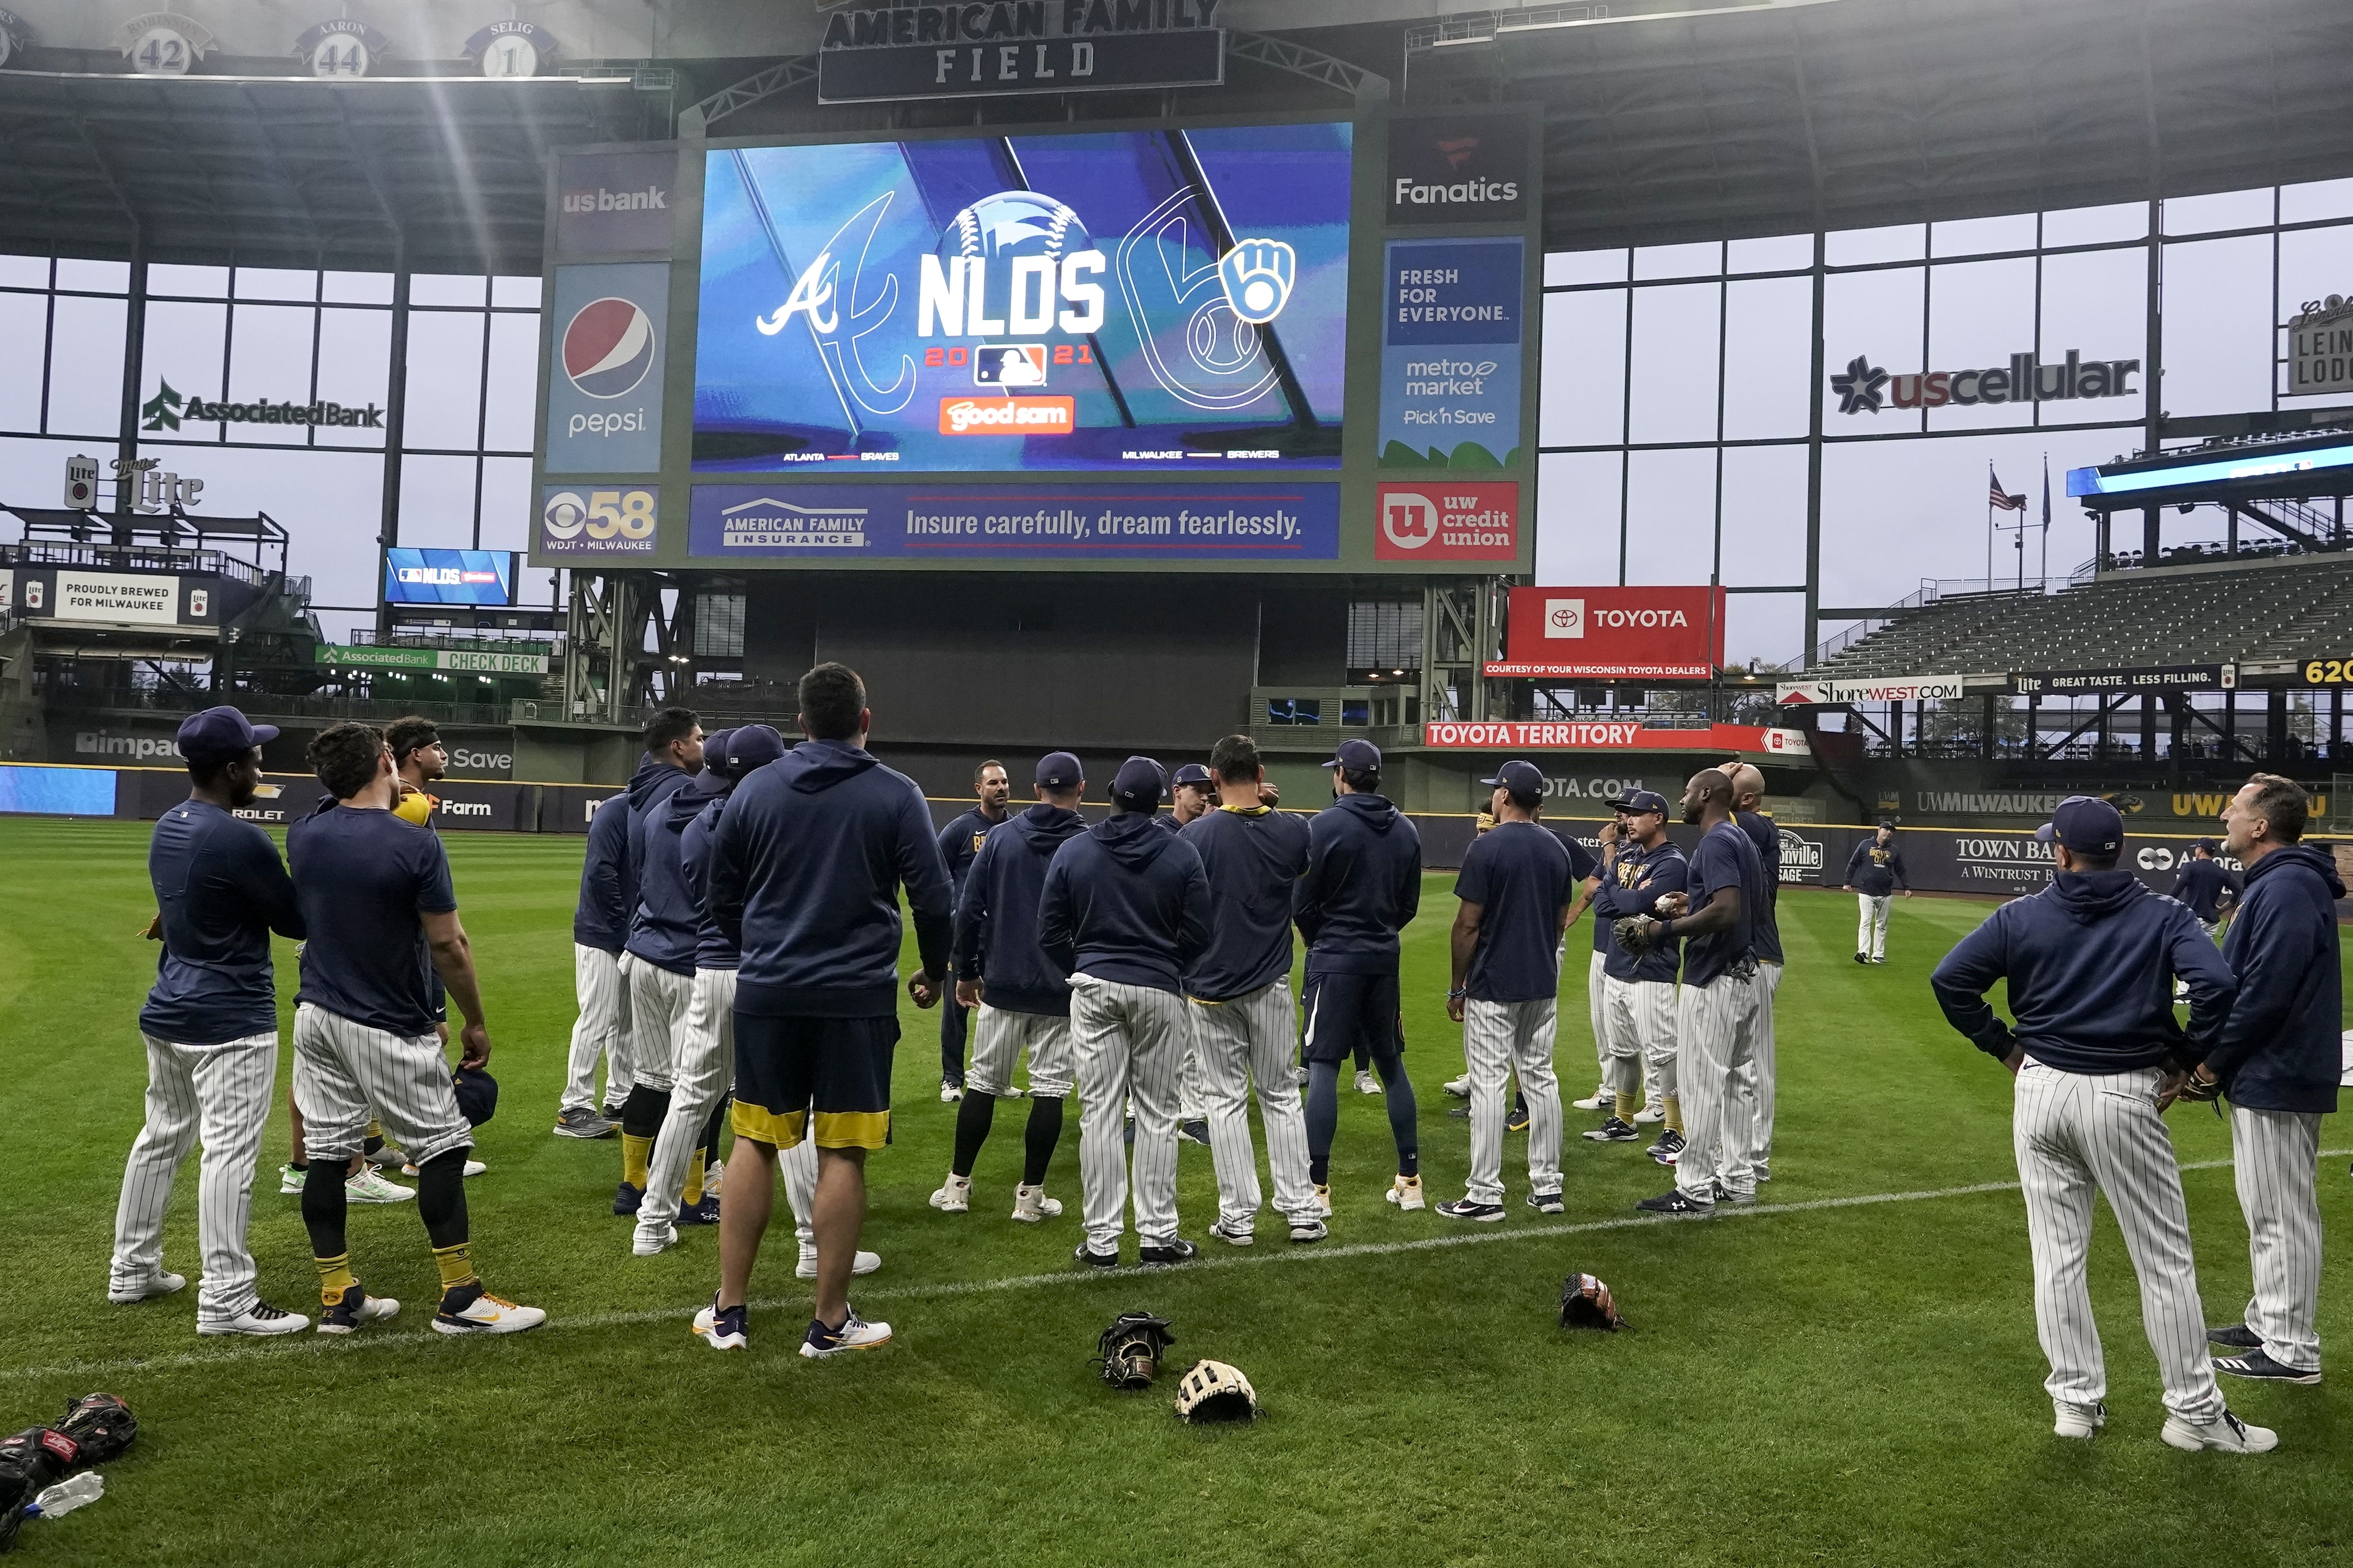 Brewers manager Craig Counsell knows the Braves will be tough in the NLDS